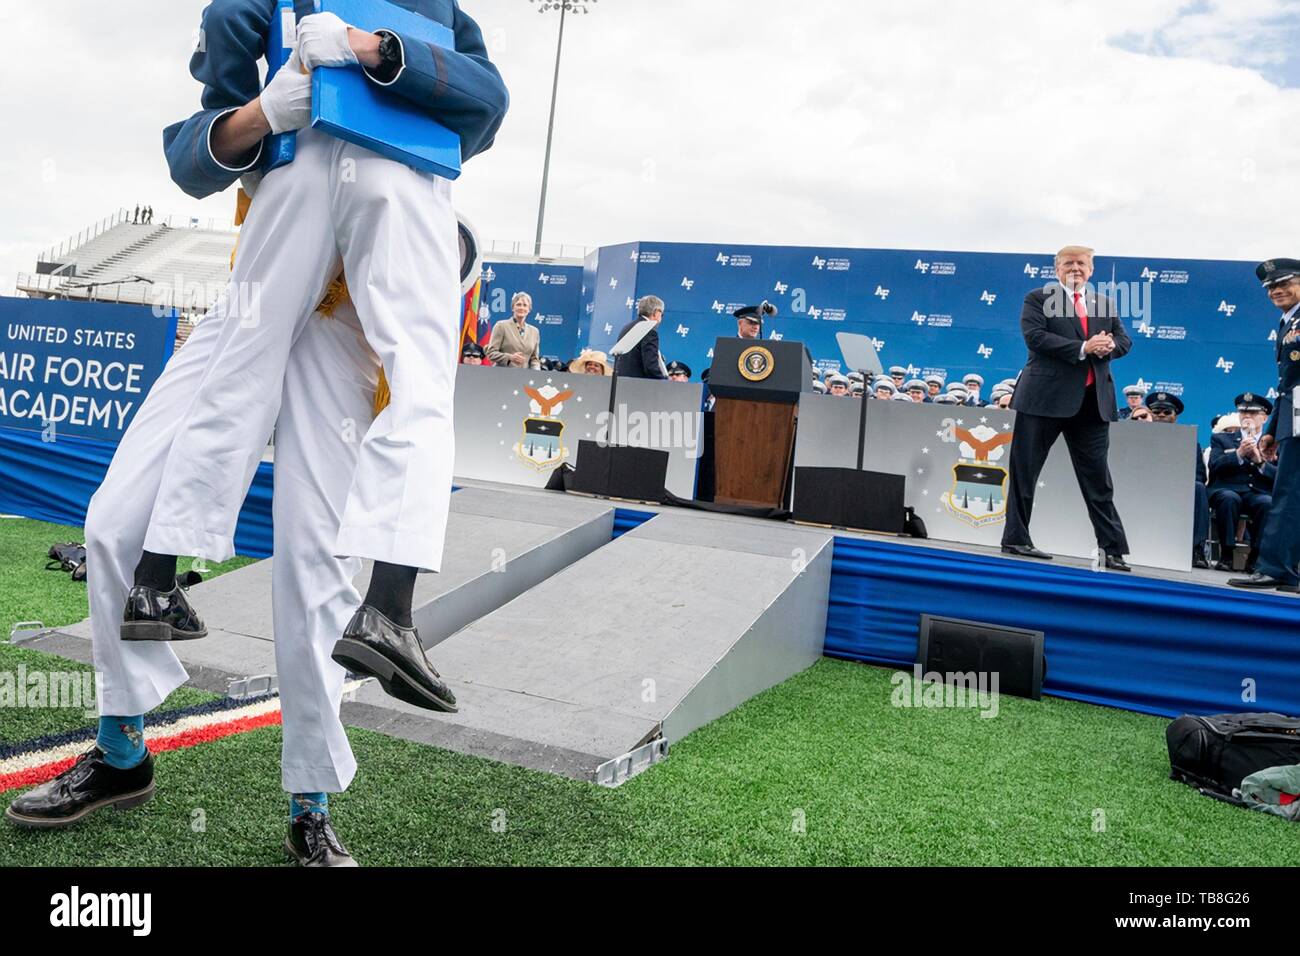 Cadets embrace after being congratulated by U.S President Donald Trump during the U.S. Air Force Academy Graduation Ceremony at the USAF Academy Falcon Stadium May 30, 2019 in Colorado Springs, Colorado. Credit: Planetpix/Alamy Live News Stock Photo